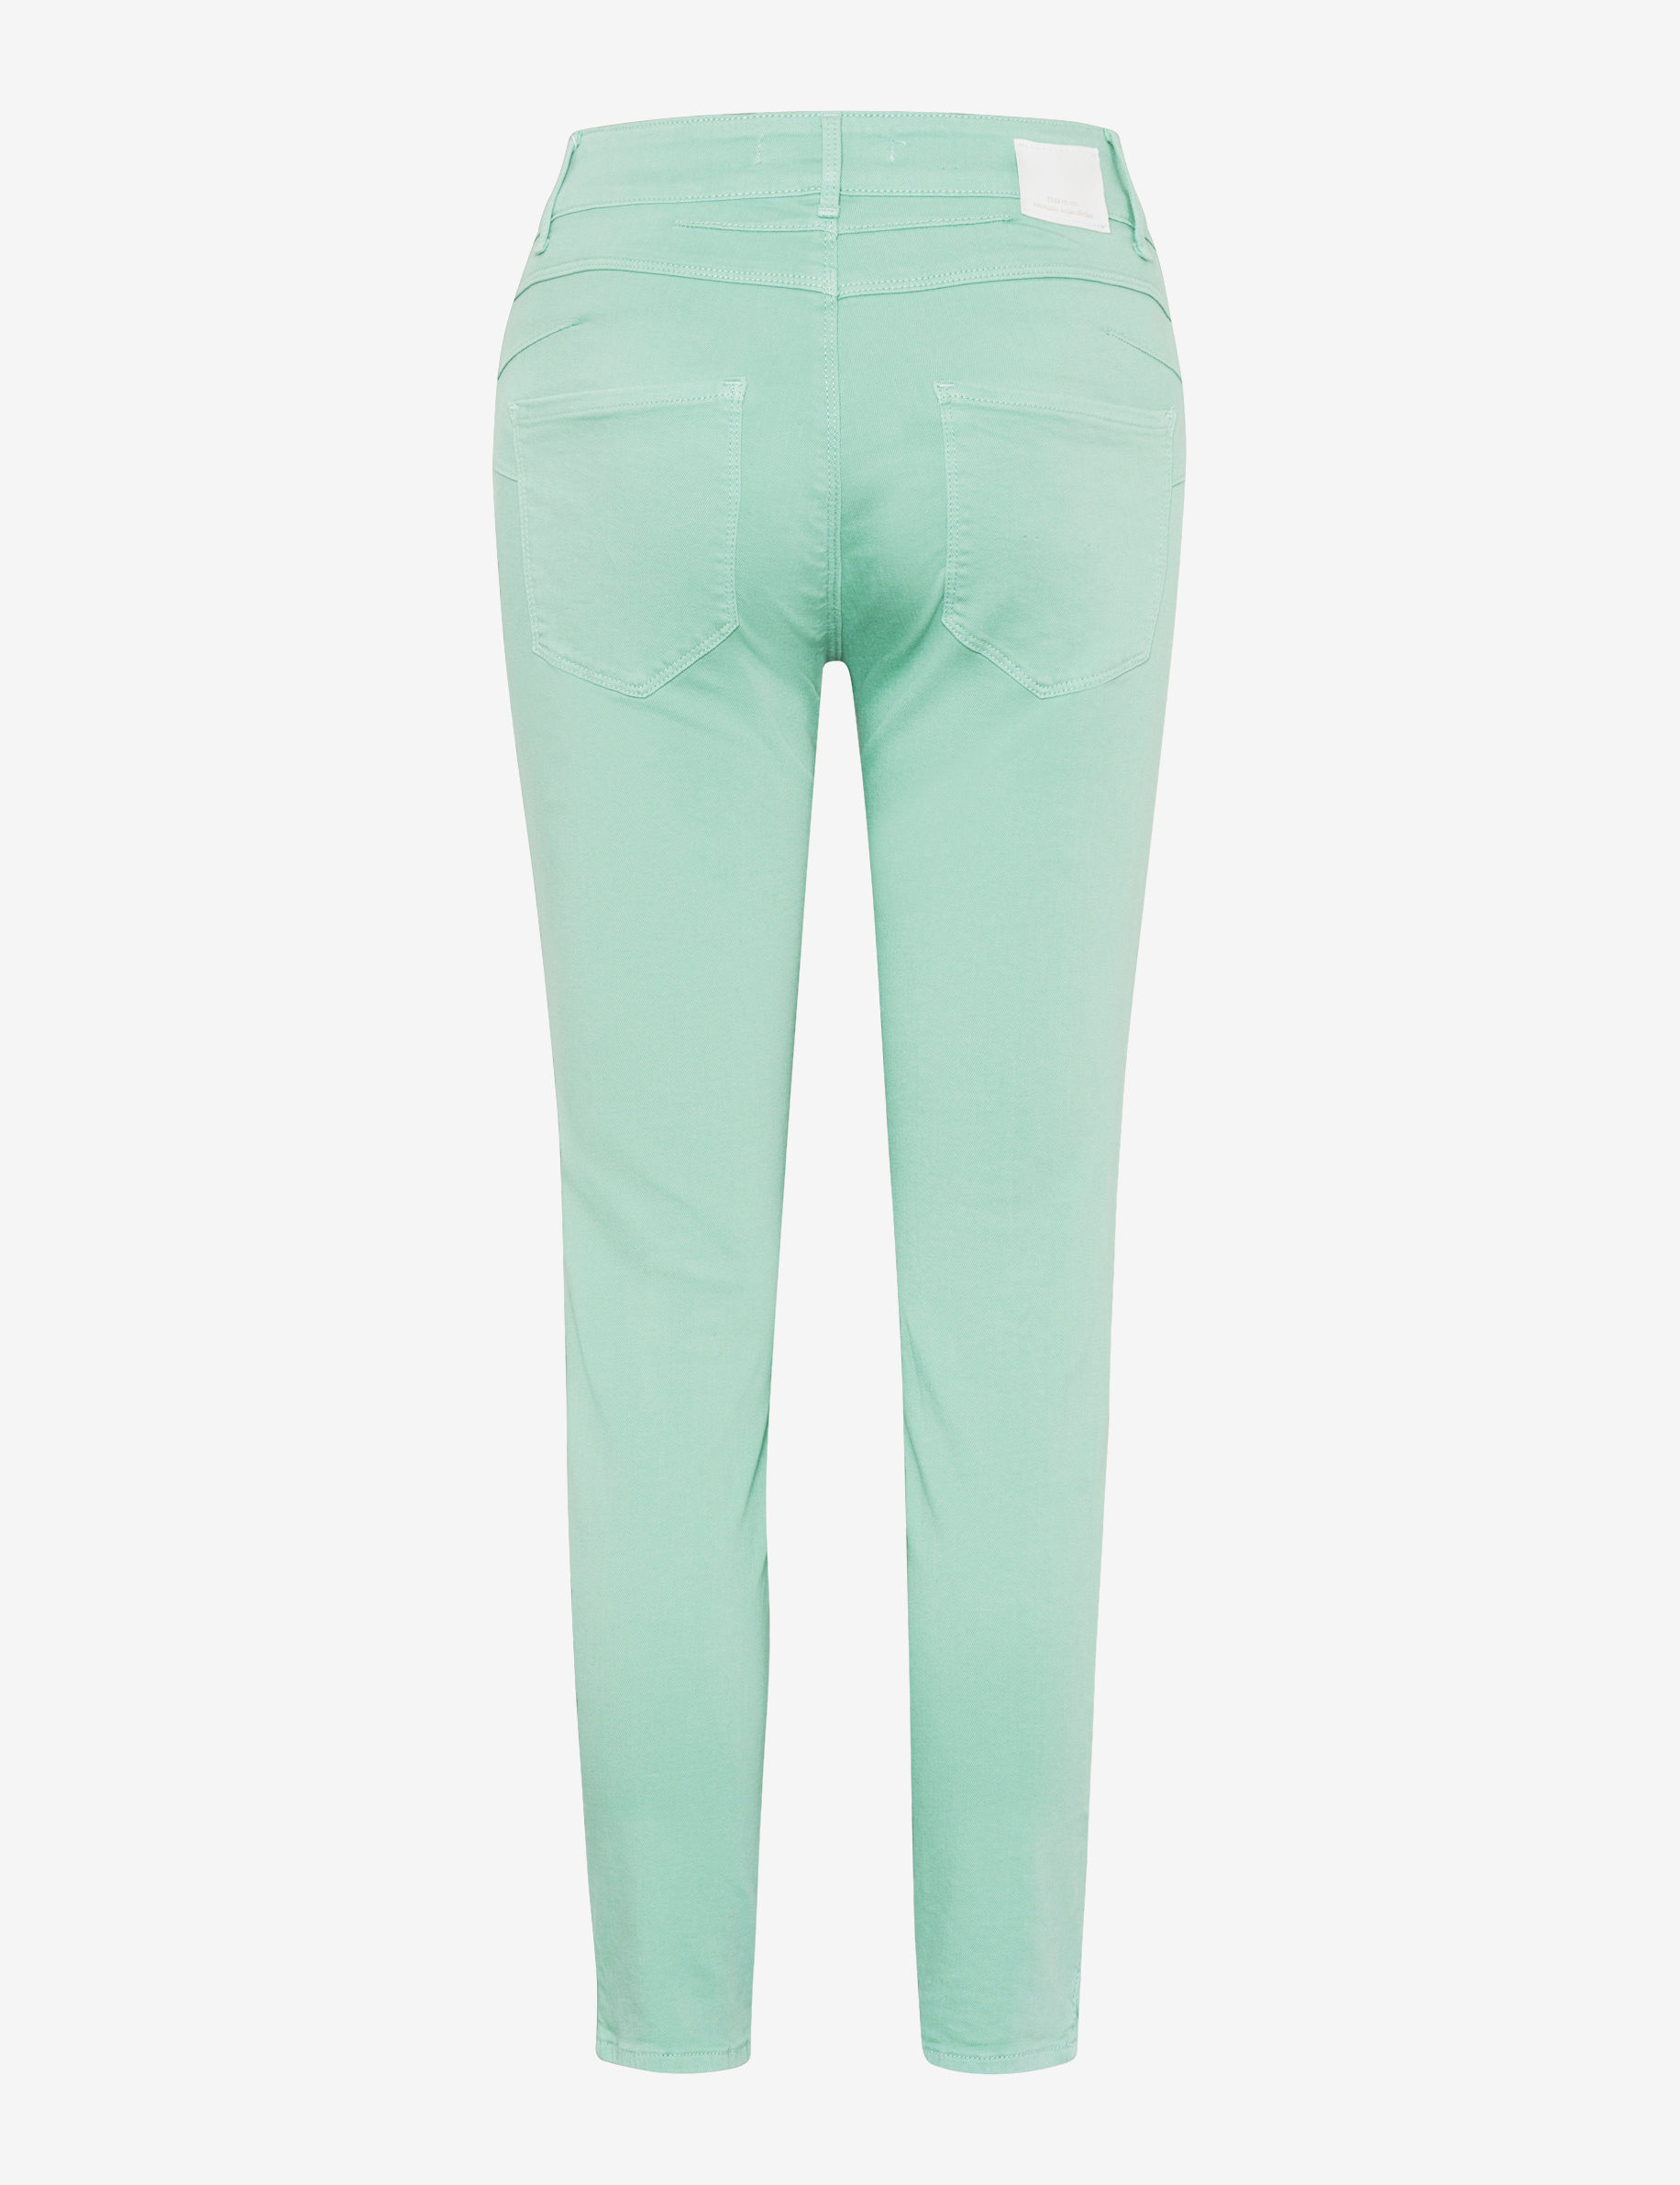 Women Style ANA S MINT Skinny Fit Stand-alone rear view